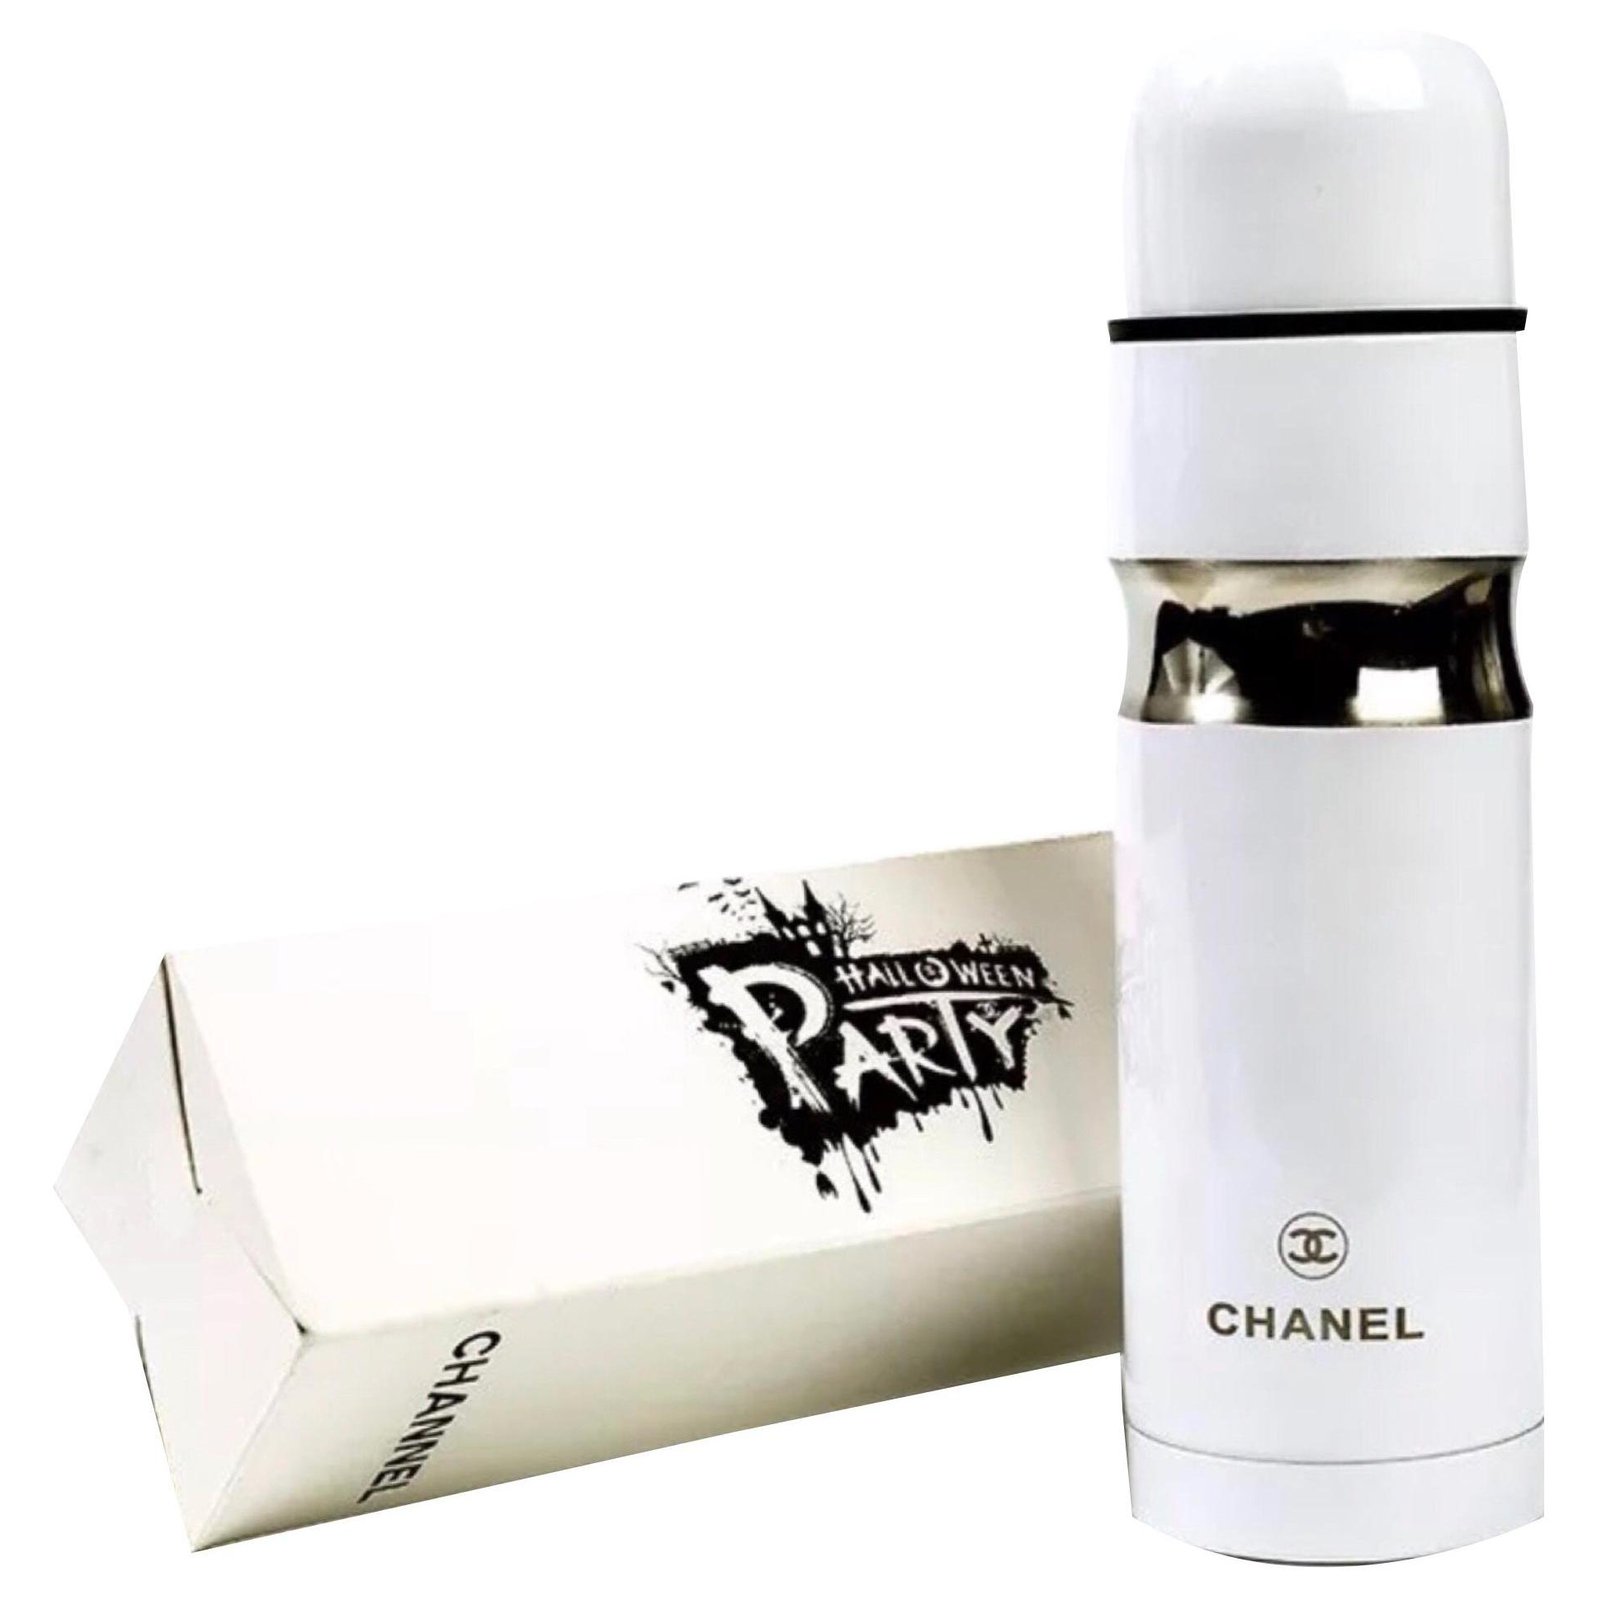 CHANEL Stainless Steel Thermos Tumbler